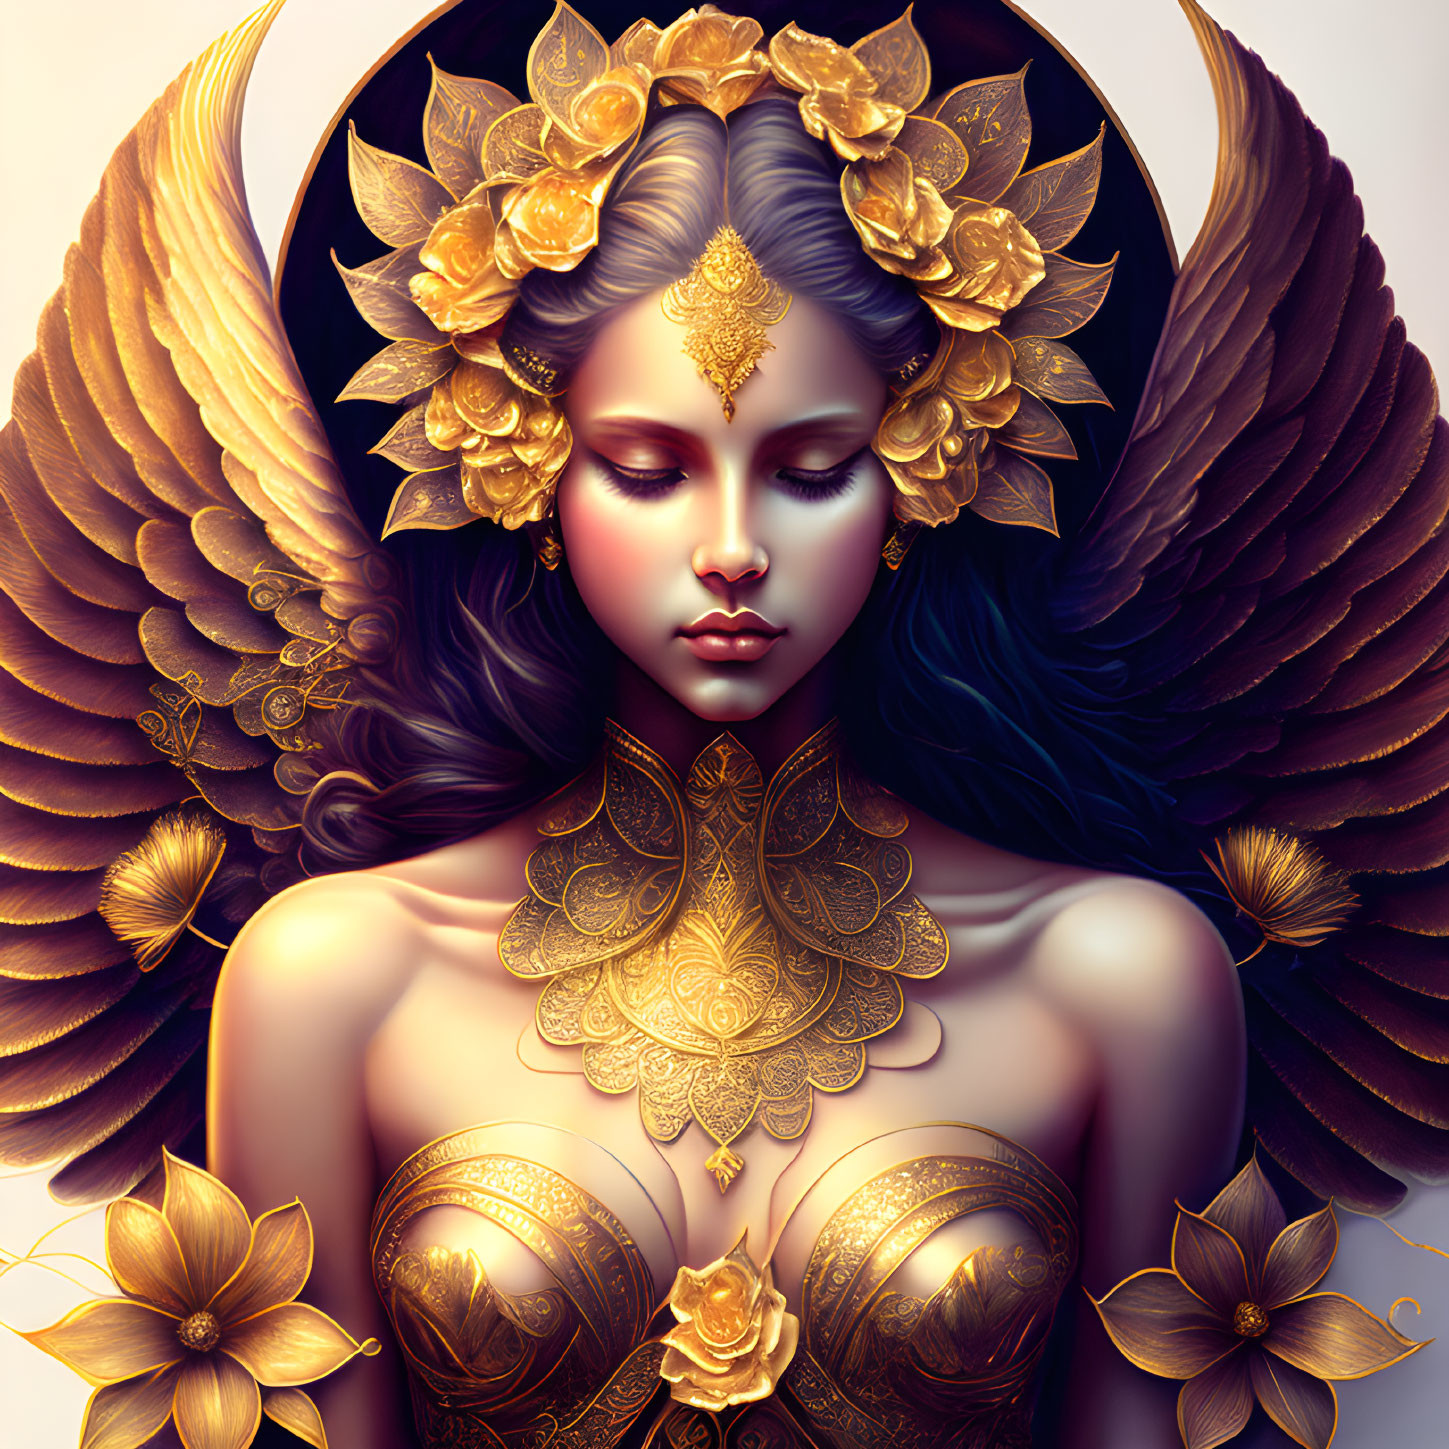 Golden flowers surround woman with ornamental headdress and dark angelic wings